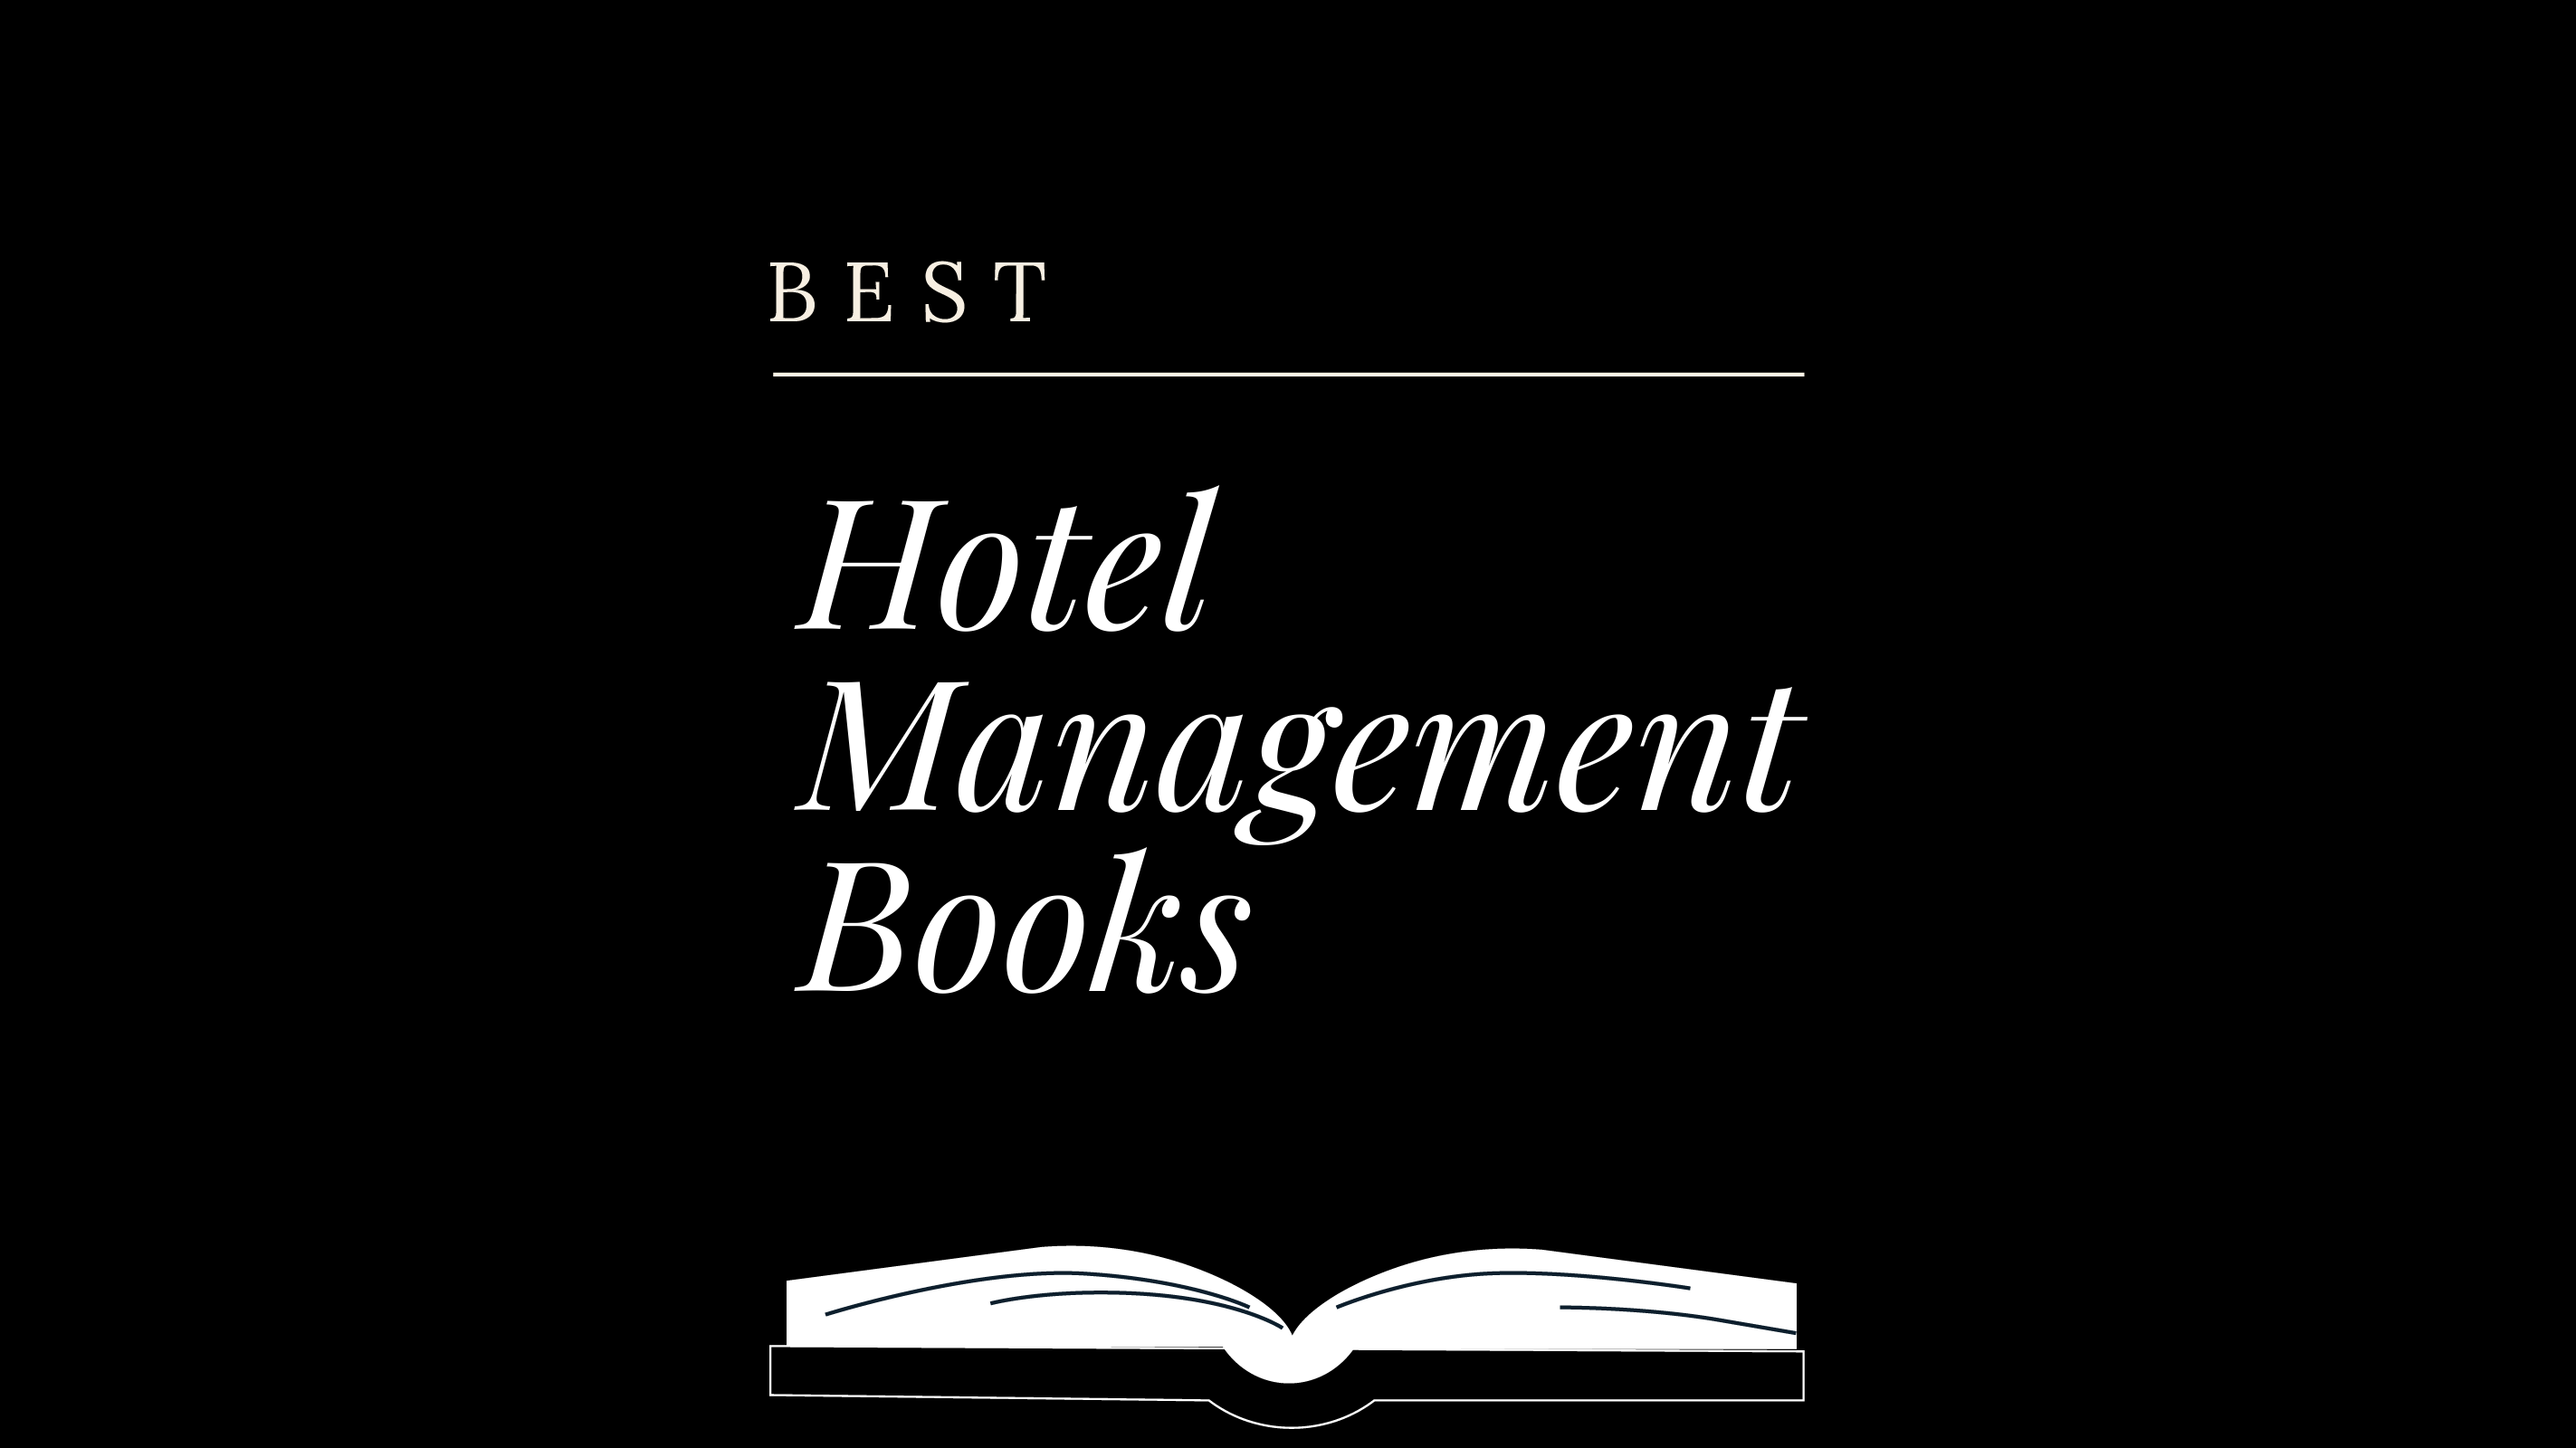 HOT-hotel-management-books-featured-image-1590